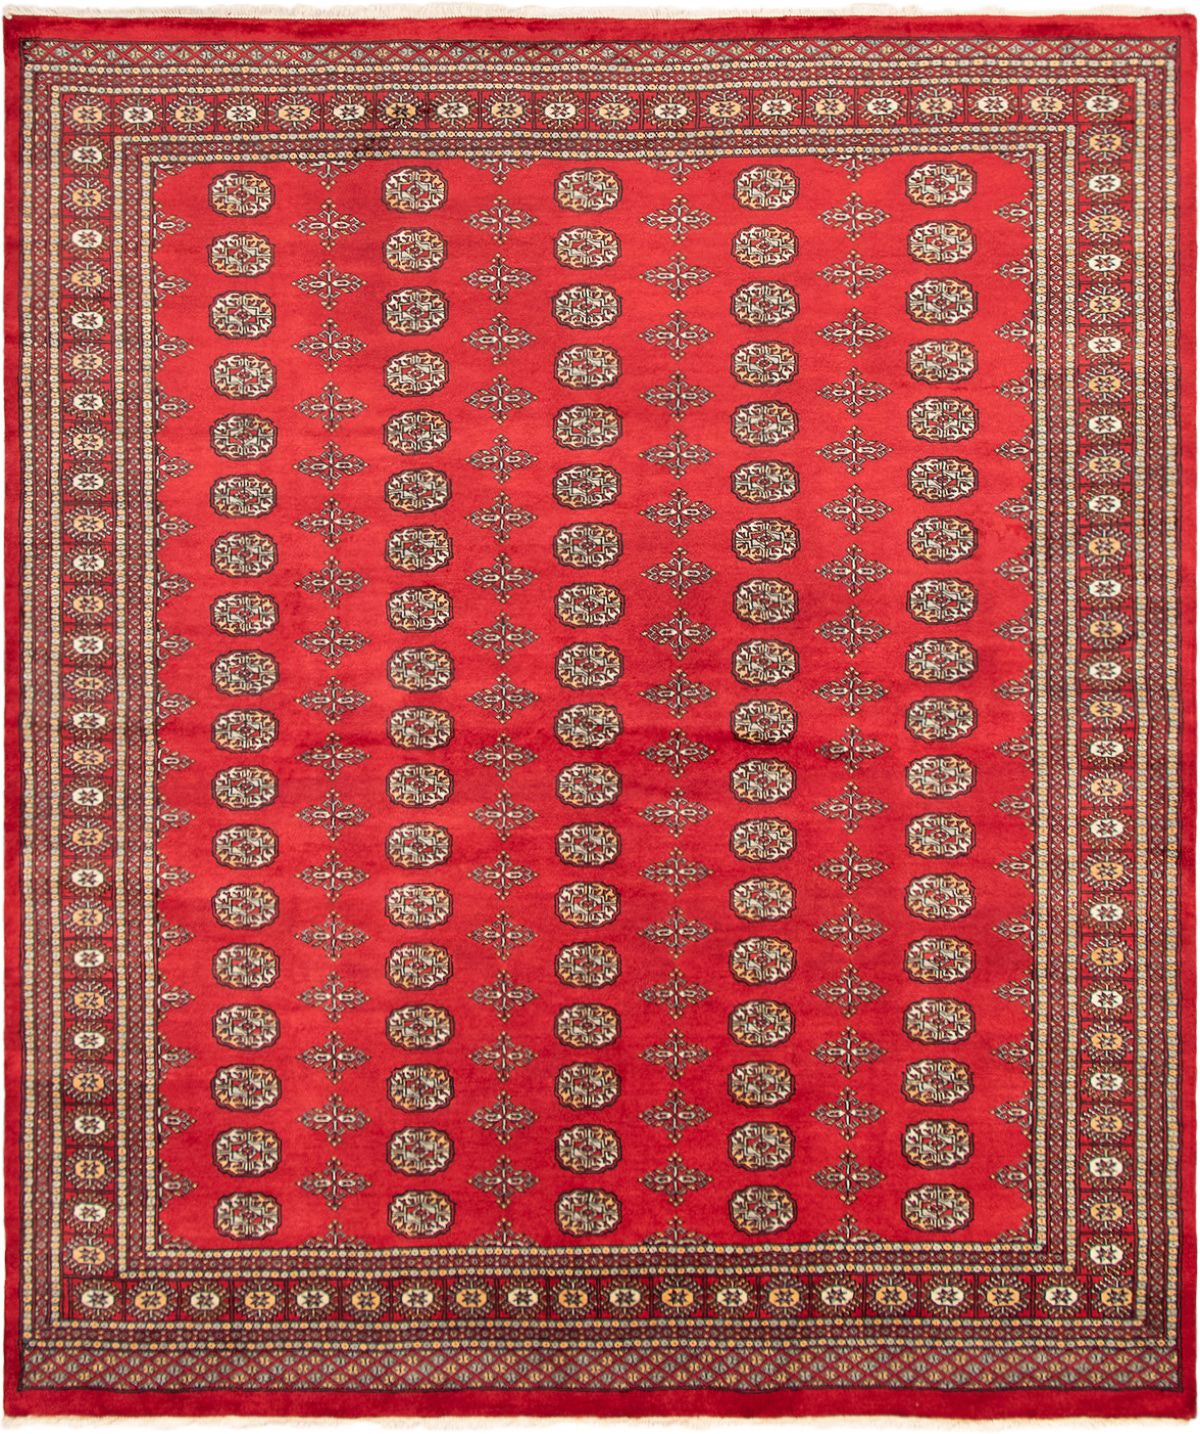 Hand-knotted Finest Peshawar Bokhara Red Wool Rug 8'2" x 9'7"  Size: 8'2" x 9'7"  